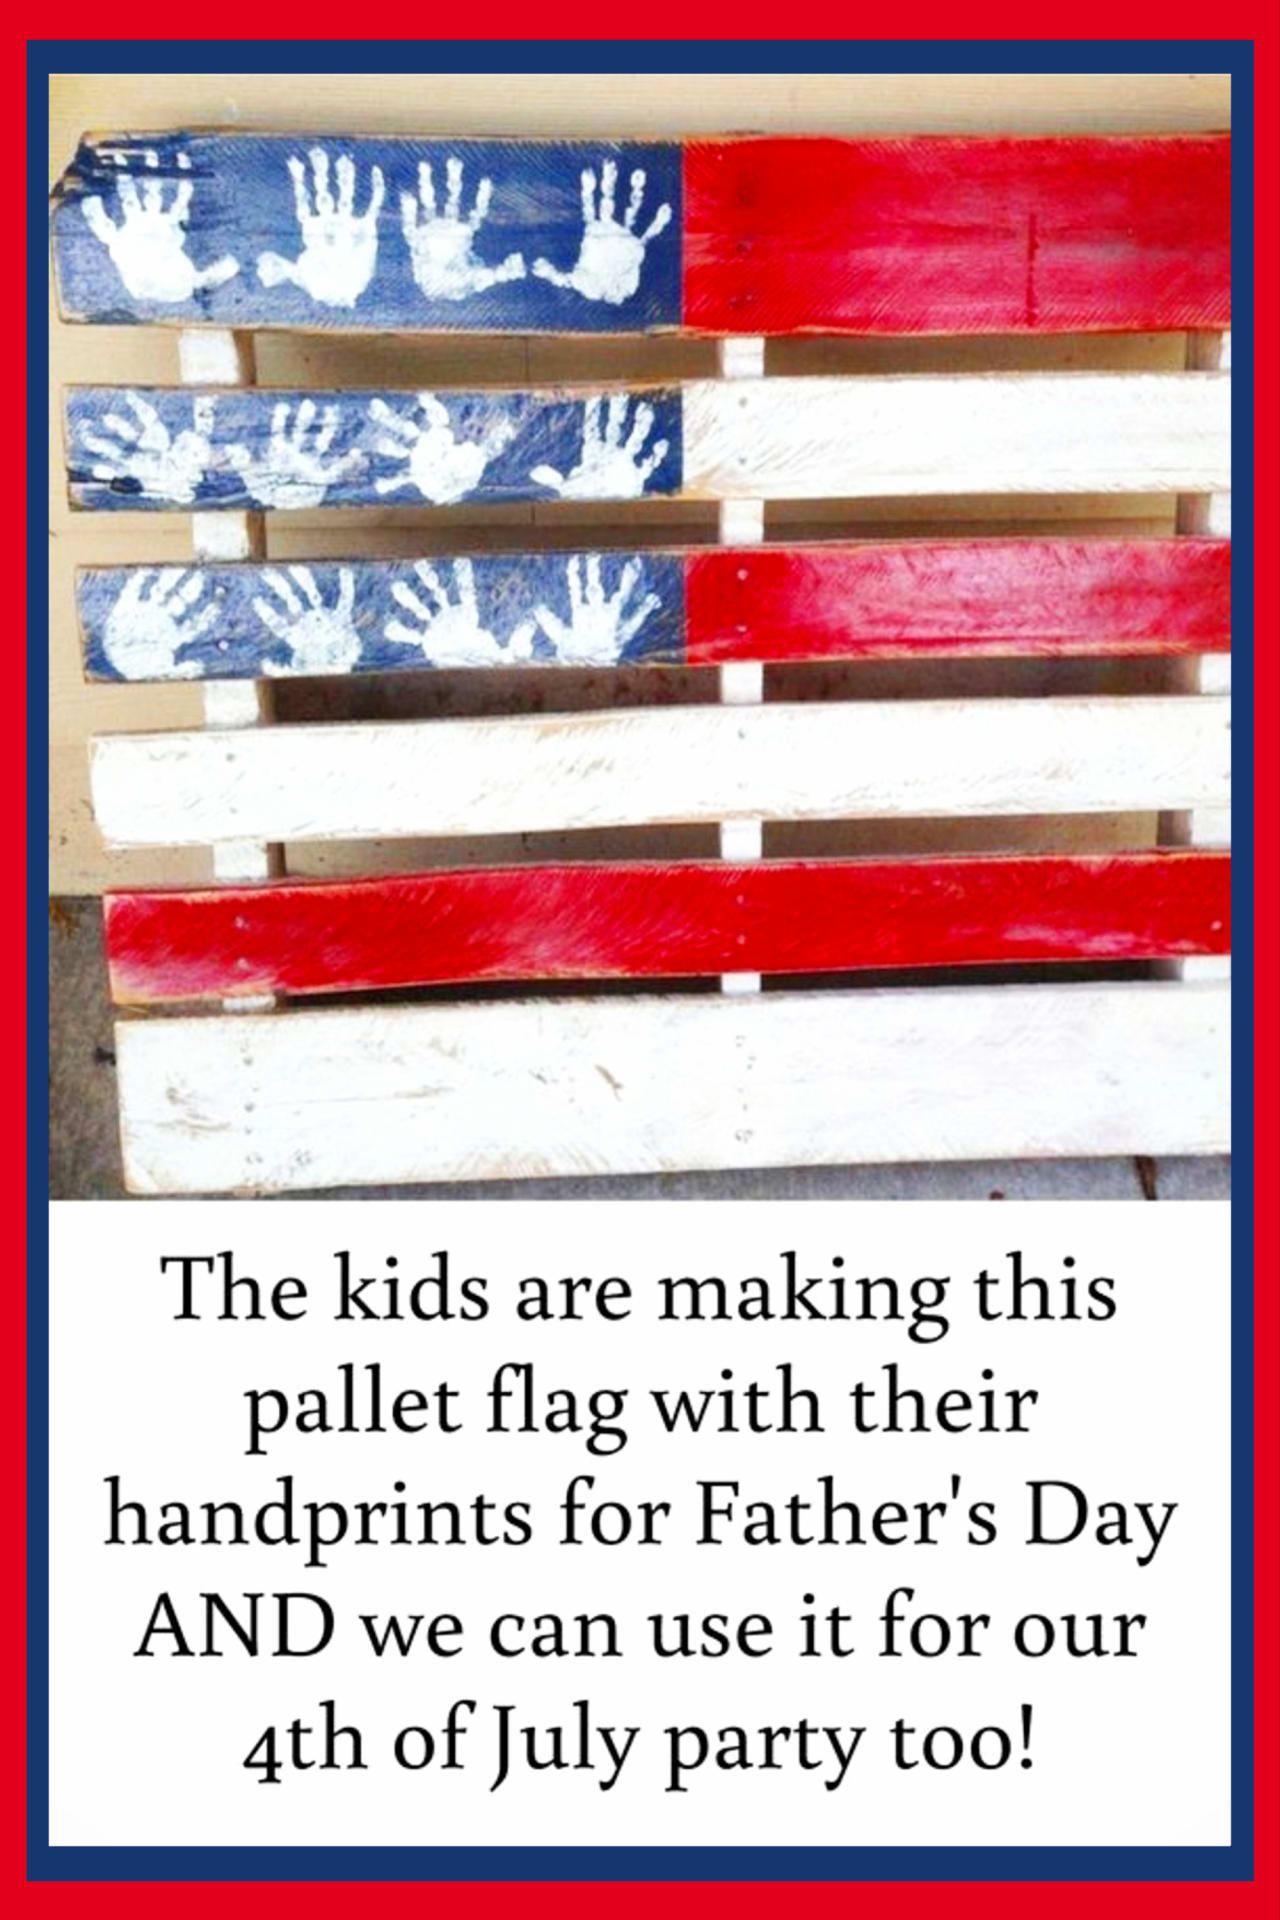 Pallet projects- easy DIY pallet projects to make or sell.  Simple beginner pallet American flag for 4th of July party and decorations - fun handprint handmade gift or craft for kids too